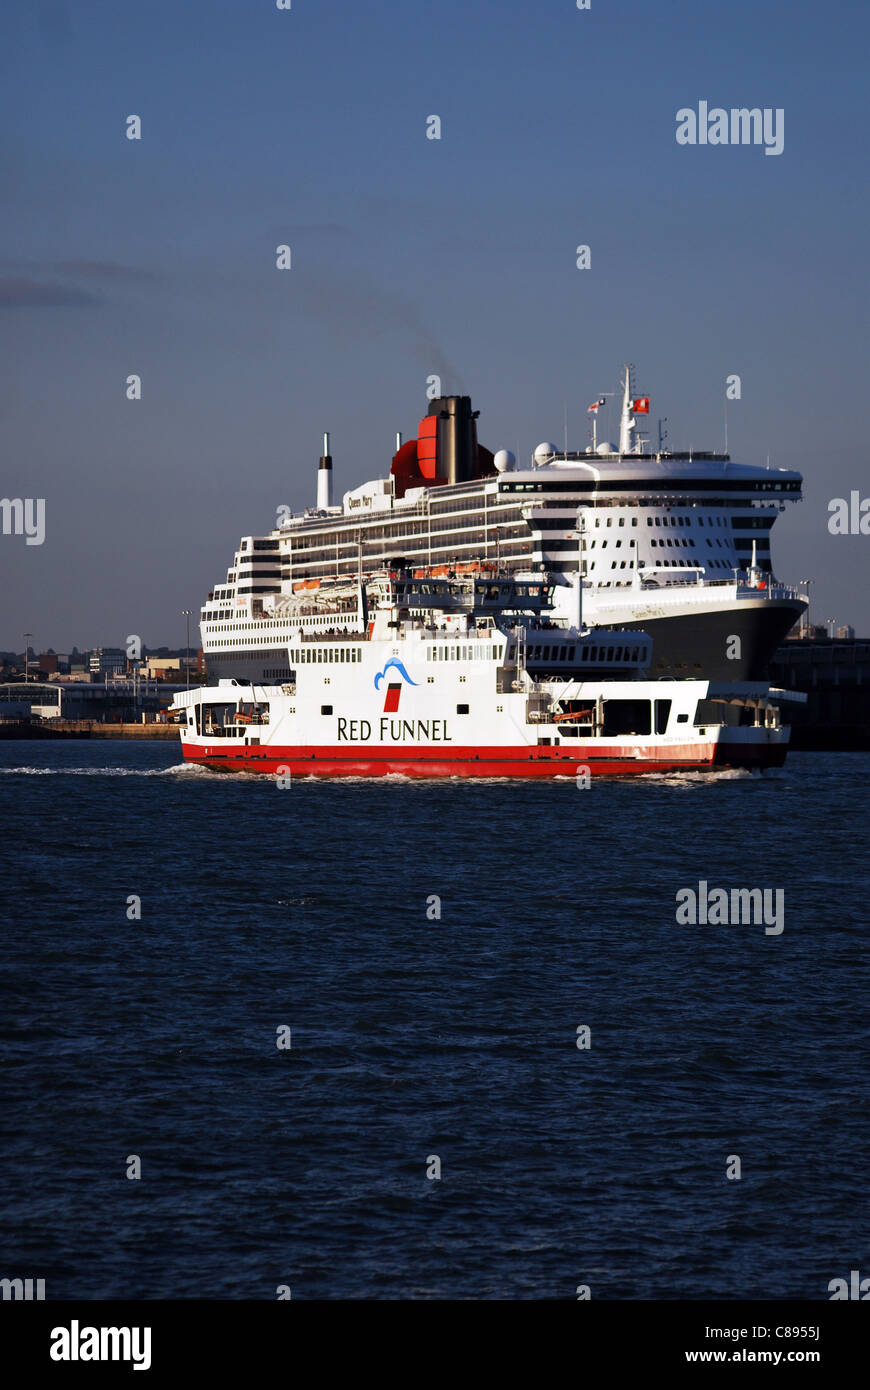 The Isle of Wight car ferry 'Red Falcon' operated by Red Funnel passes the cruise liner Queen Mary 2 in Southampton. Stock Photo